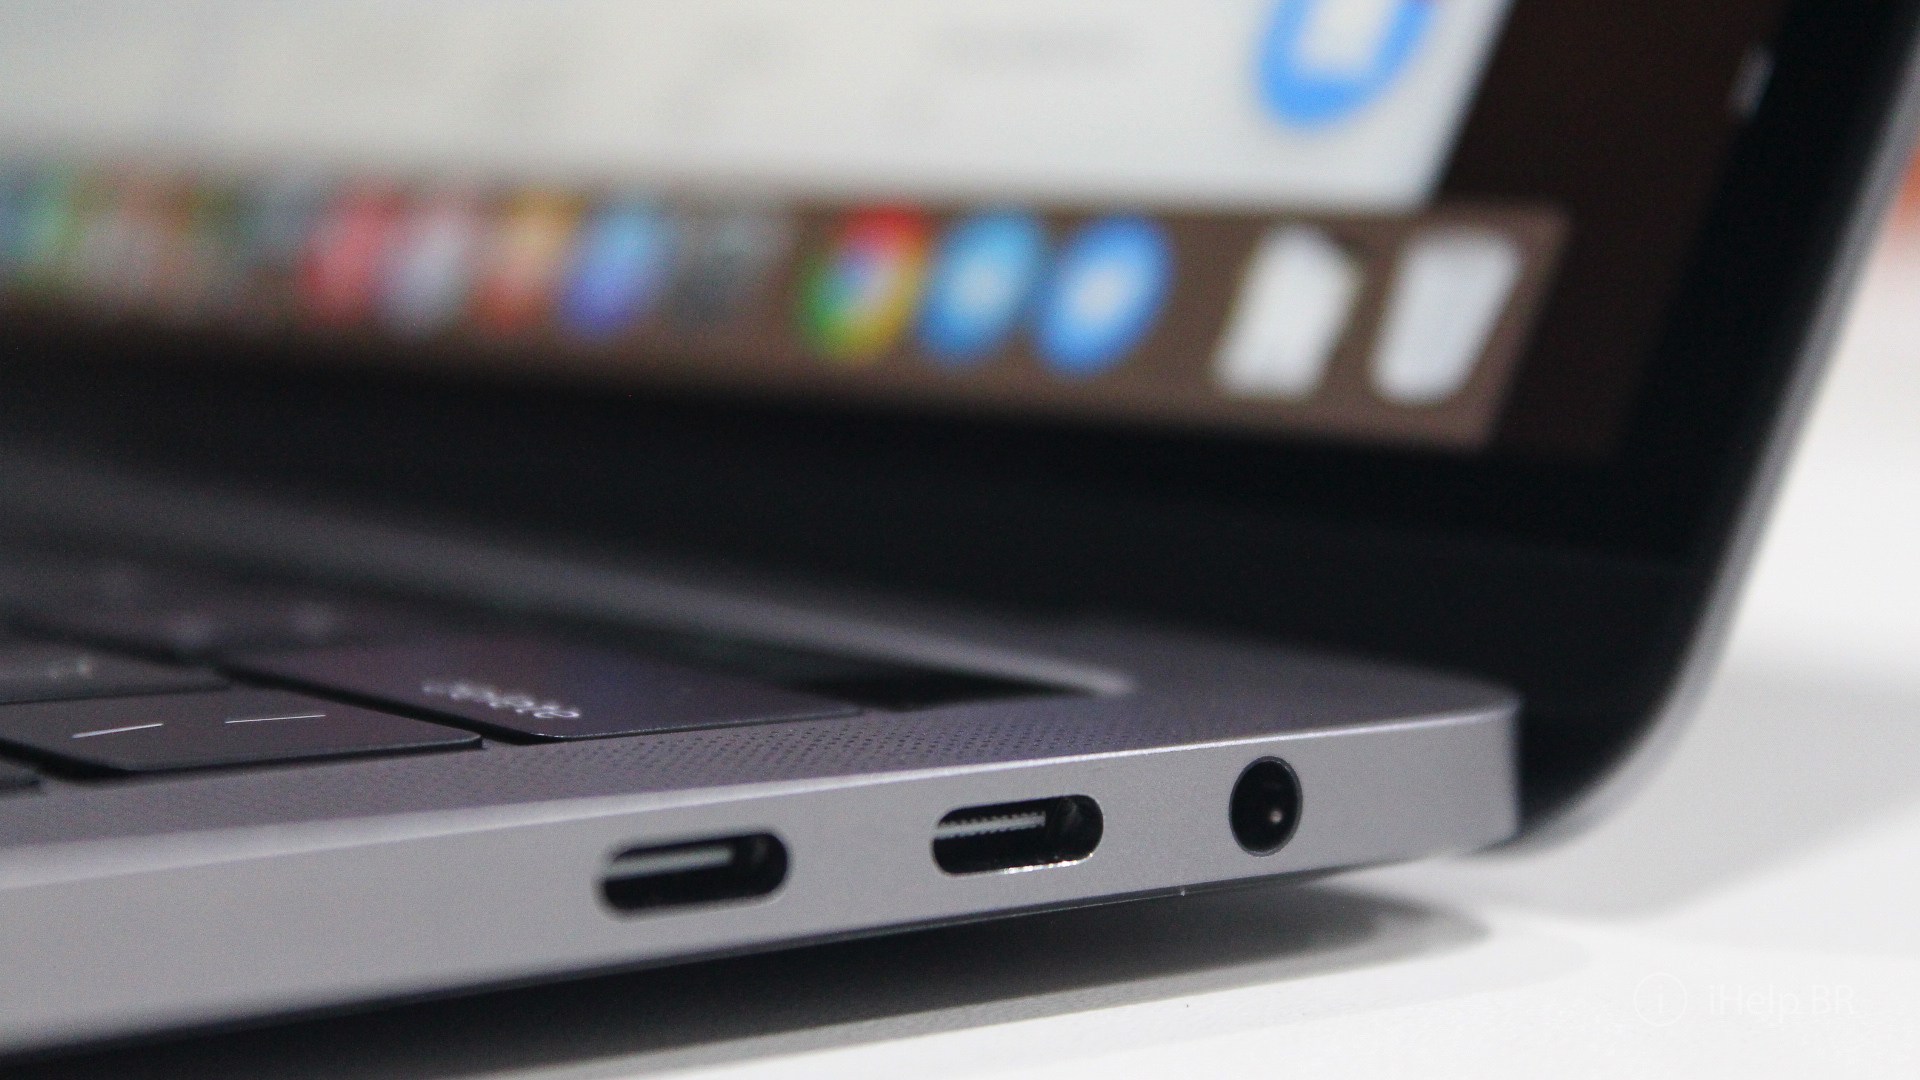 Solving: Headphone jack only works on one side on Macbook